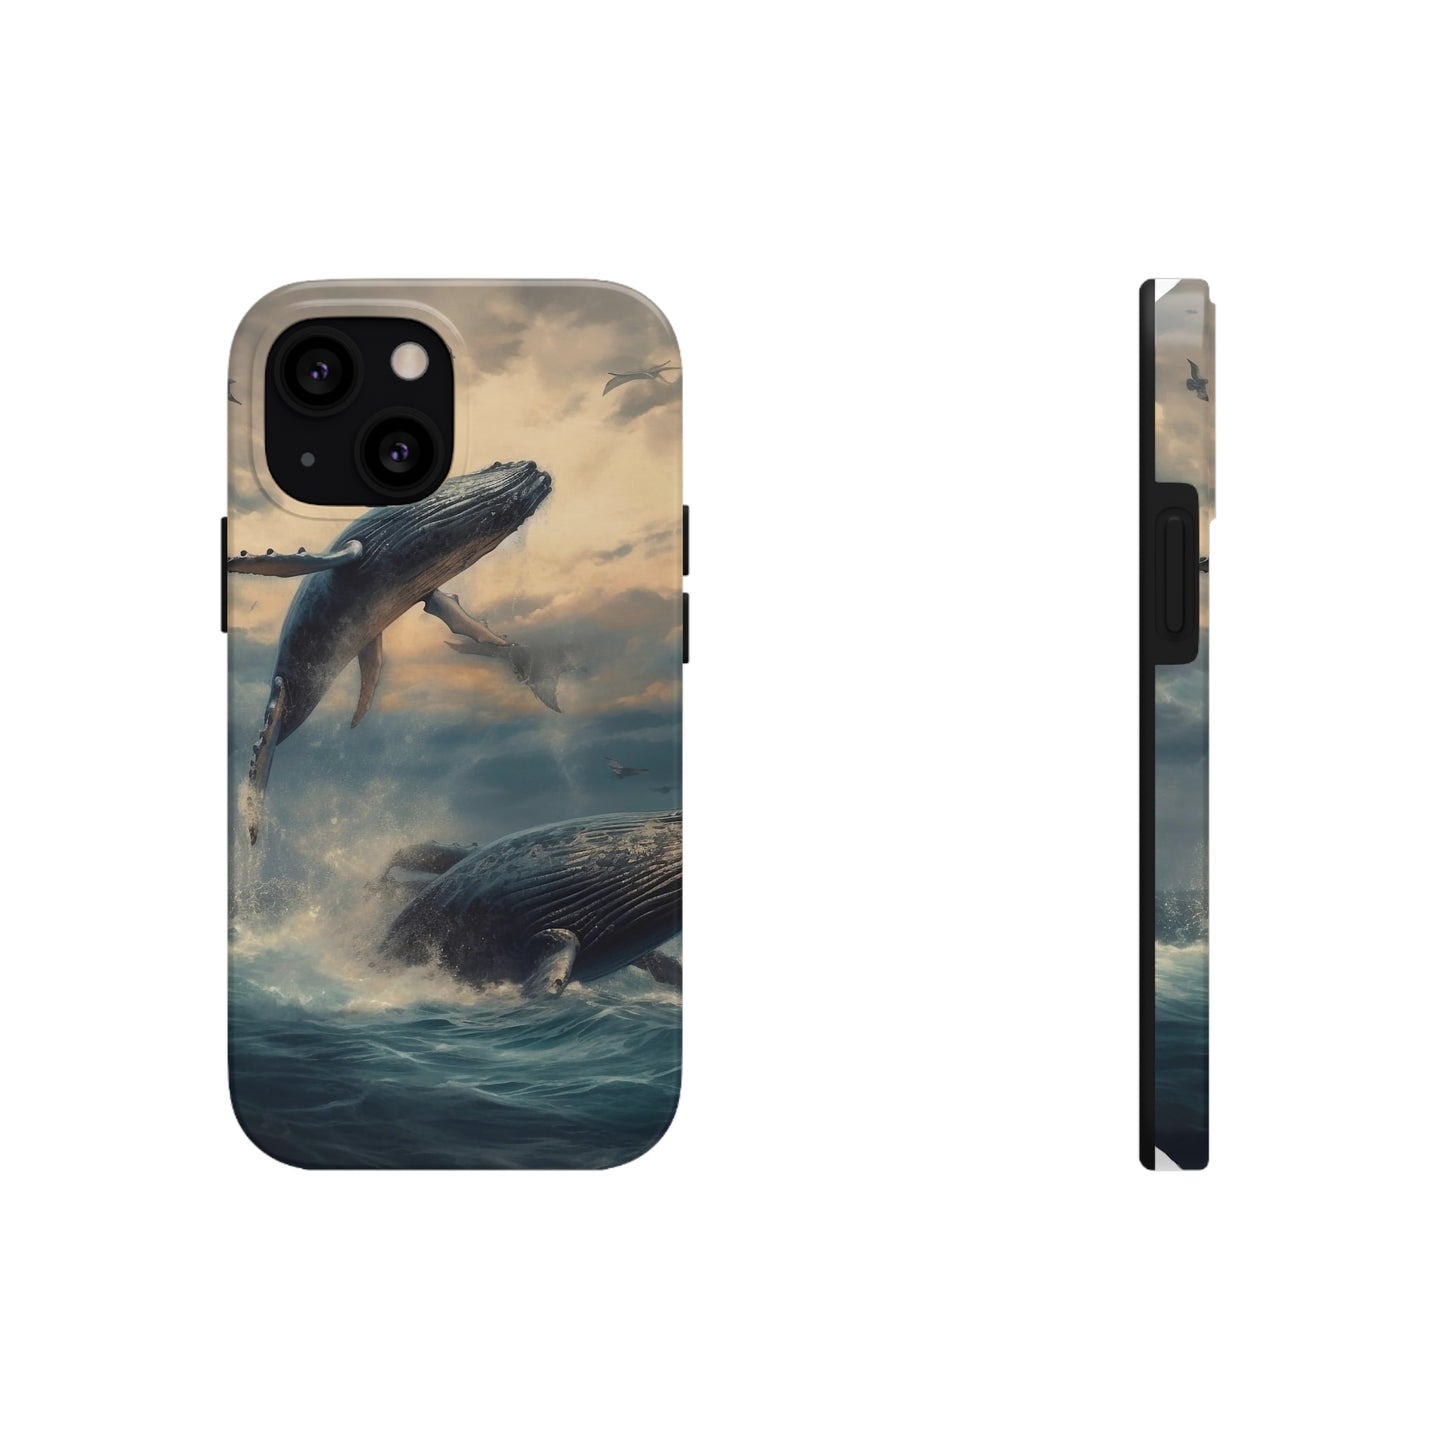 The whale chaos - Tough Phone Cases